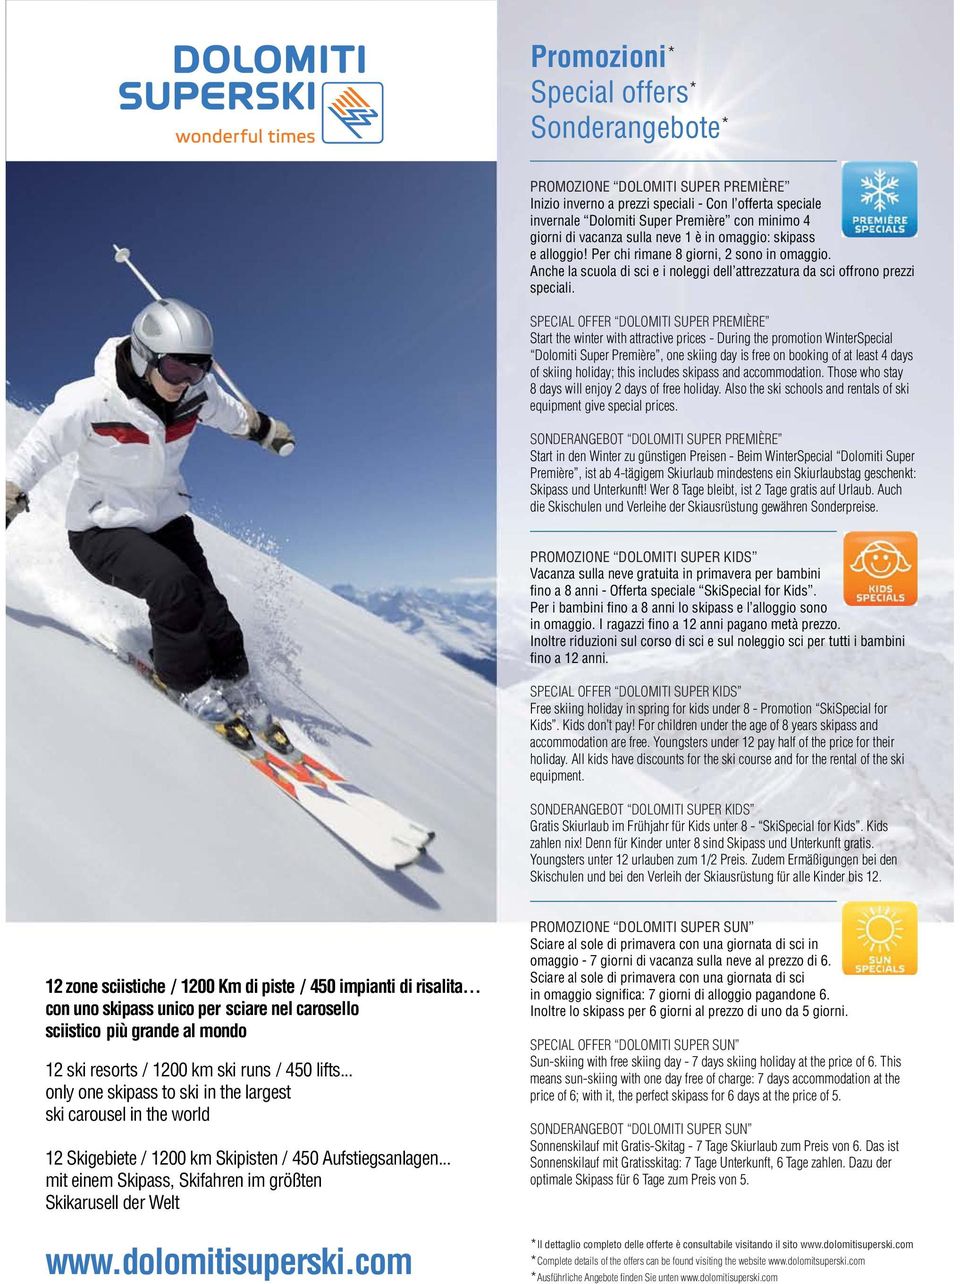 SPECIAL OFFER DOLOMITI SUPER PREMIÈRE Start the winter with attractive prices - During the promotion WinterSpecial Dolomiti Super Première, one skiing day is free on booking of at least 4 days of